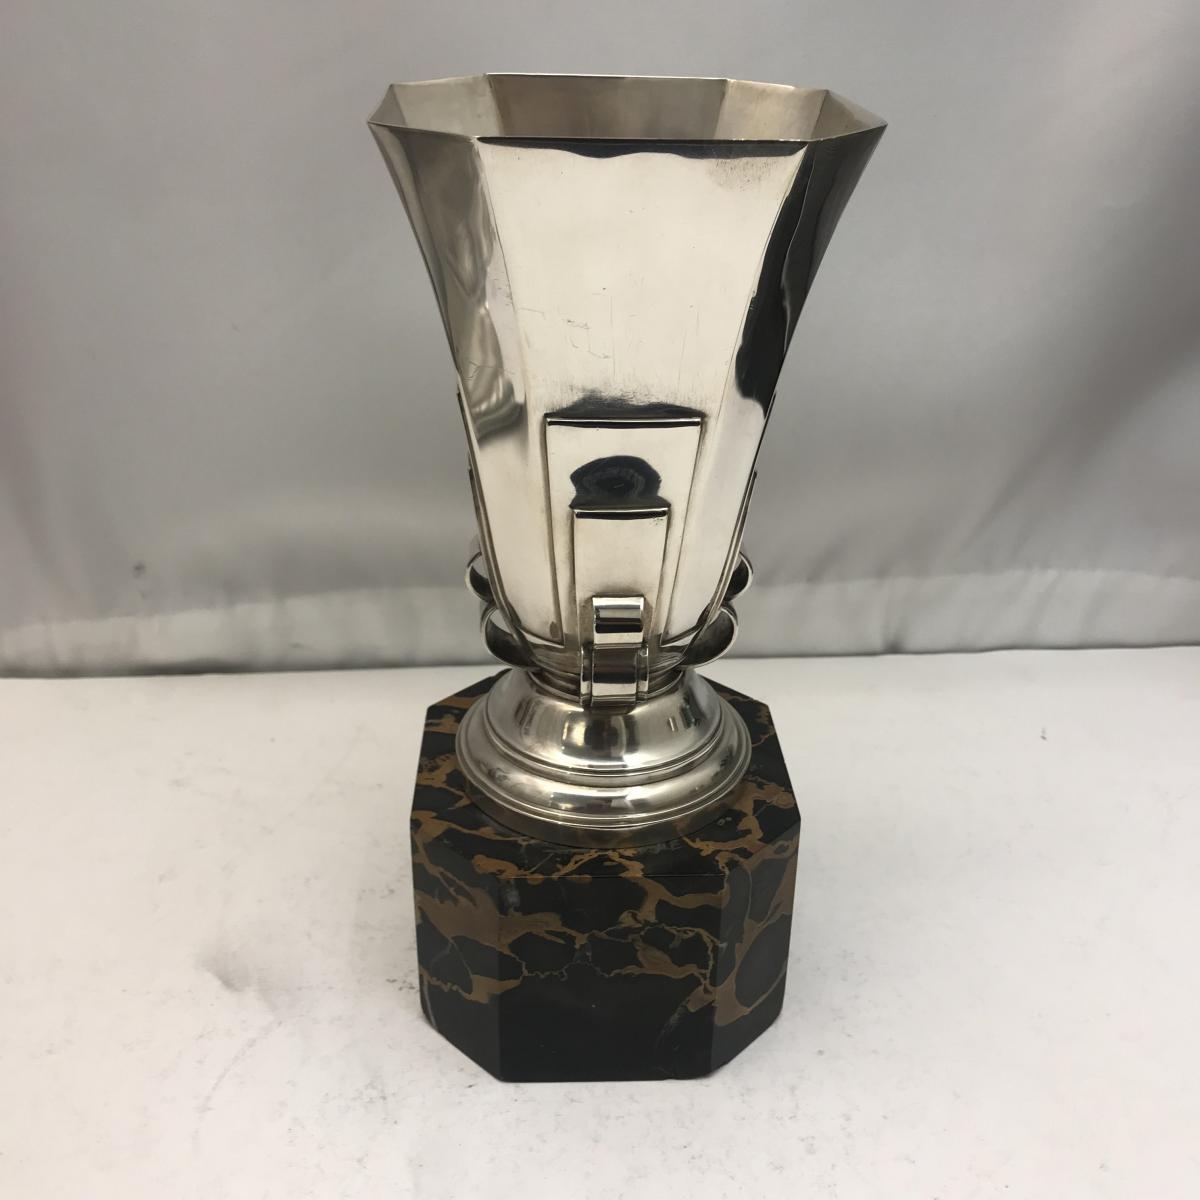 Antique silver and marble Trophy